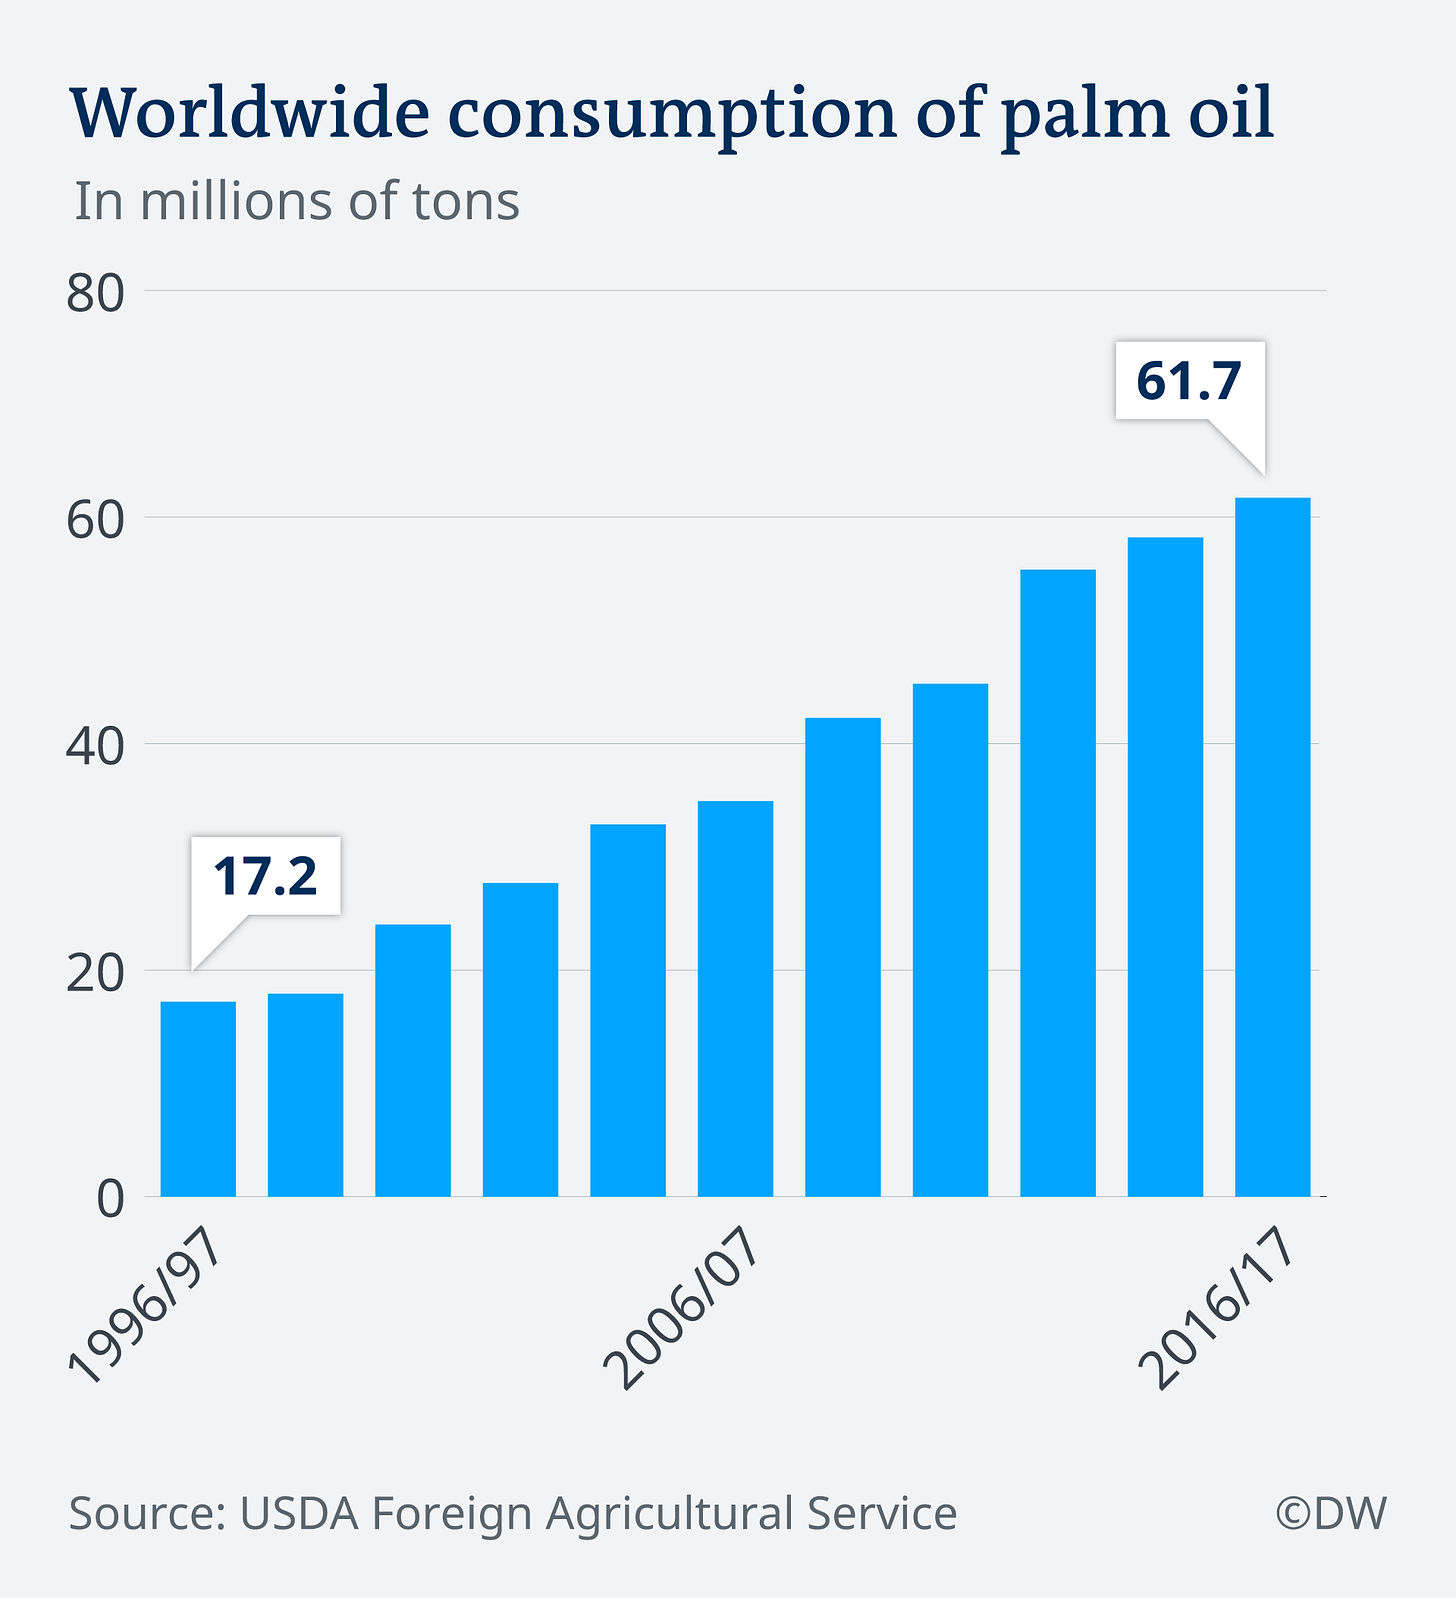 An infographic showing worldwide consumption of palm oil from 1996-2017